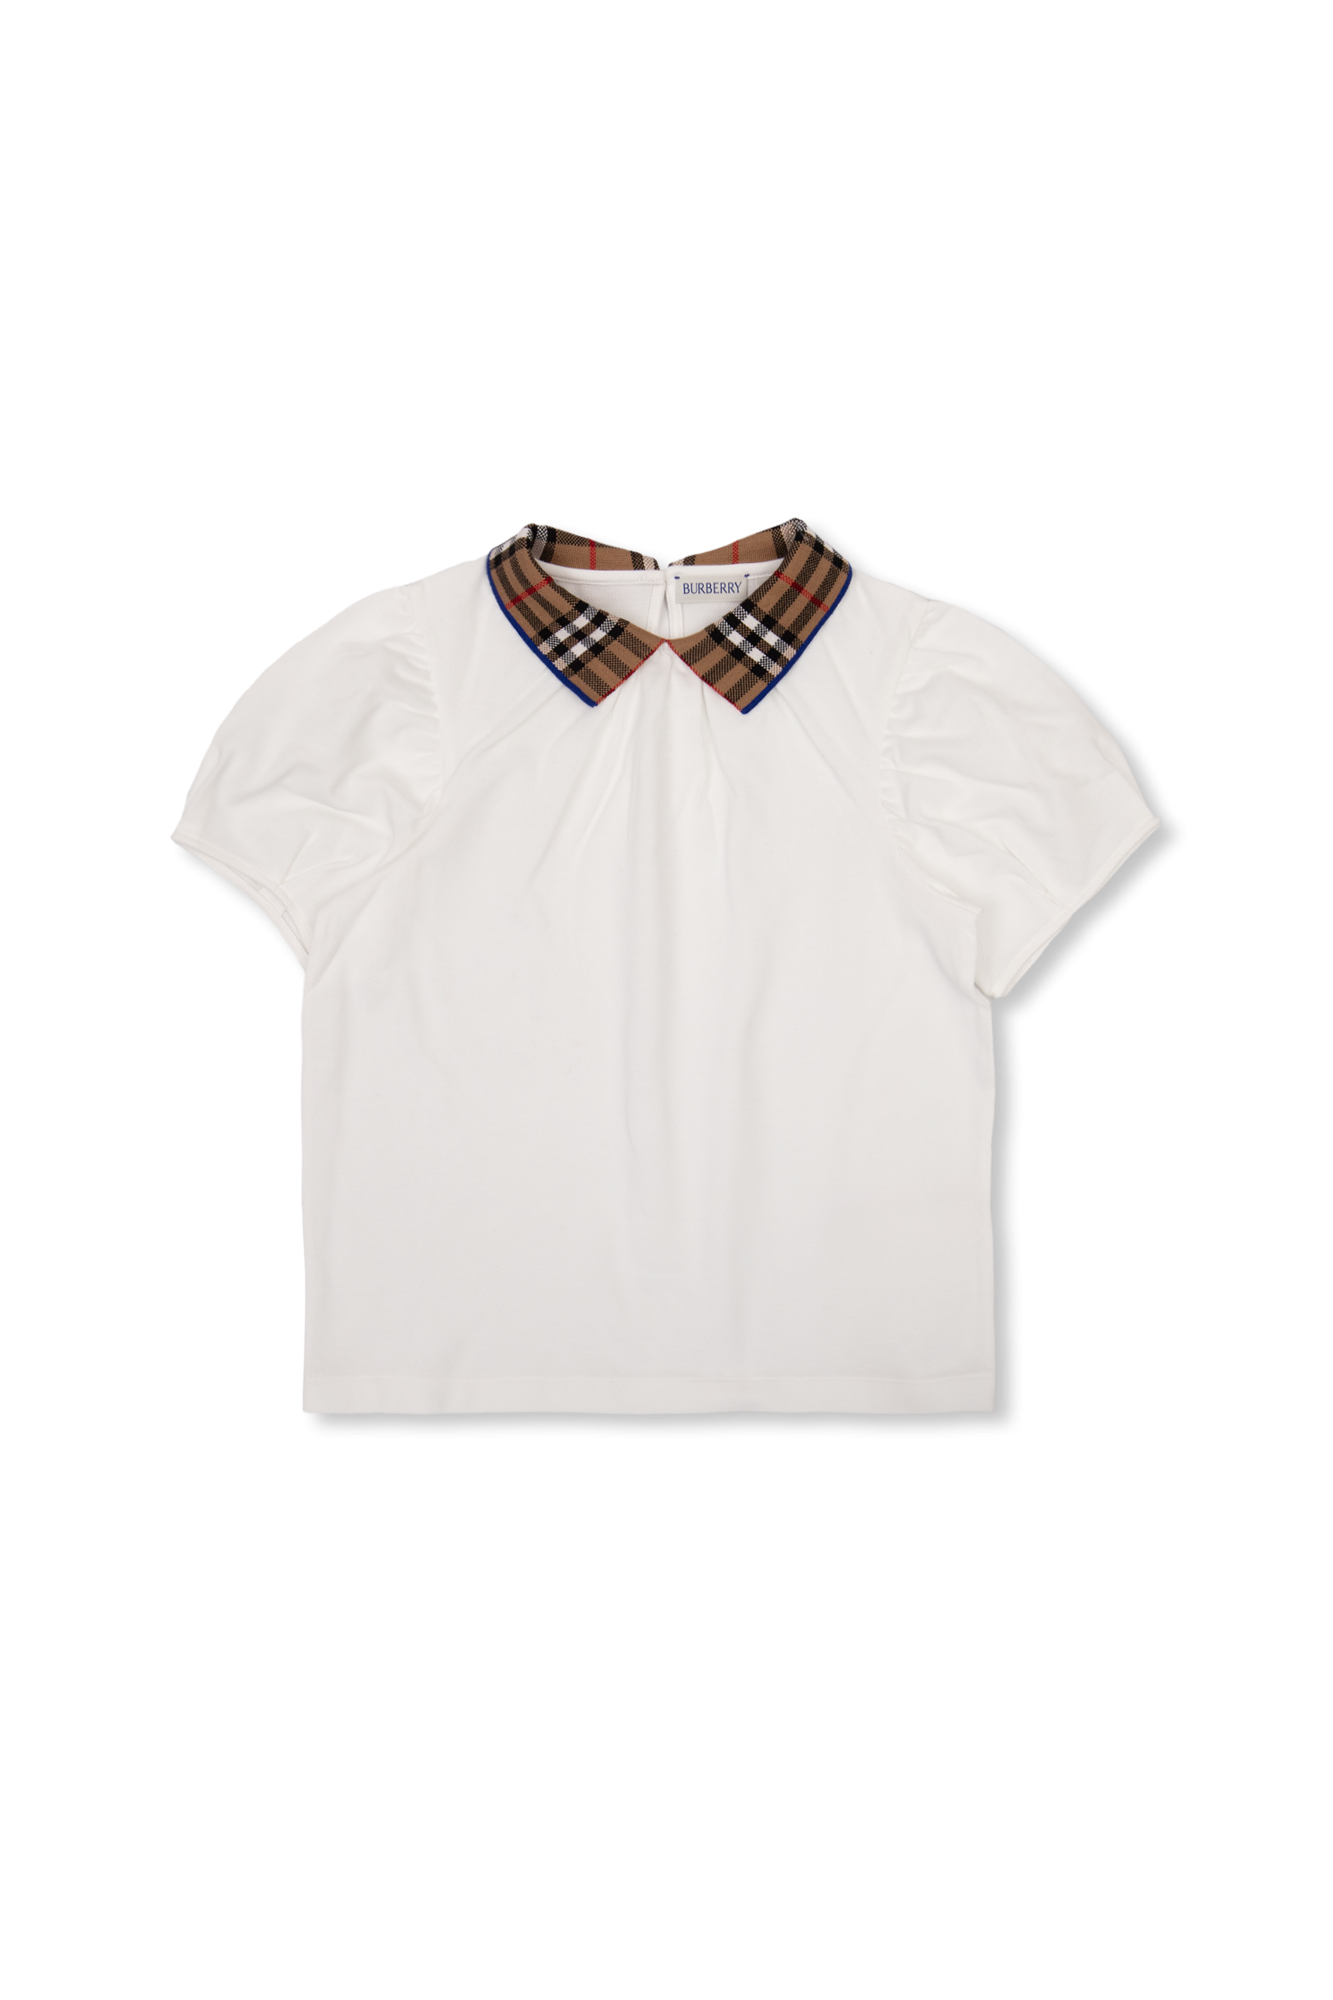 burberry Sonnenbrille Kids Top with short sleeves